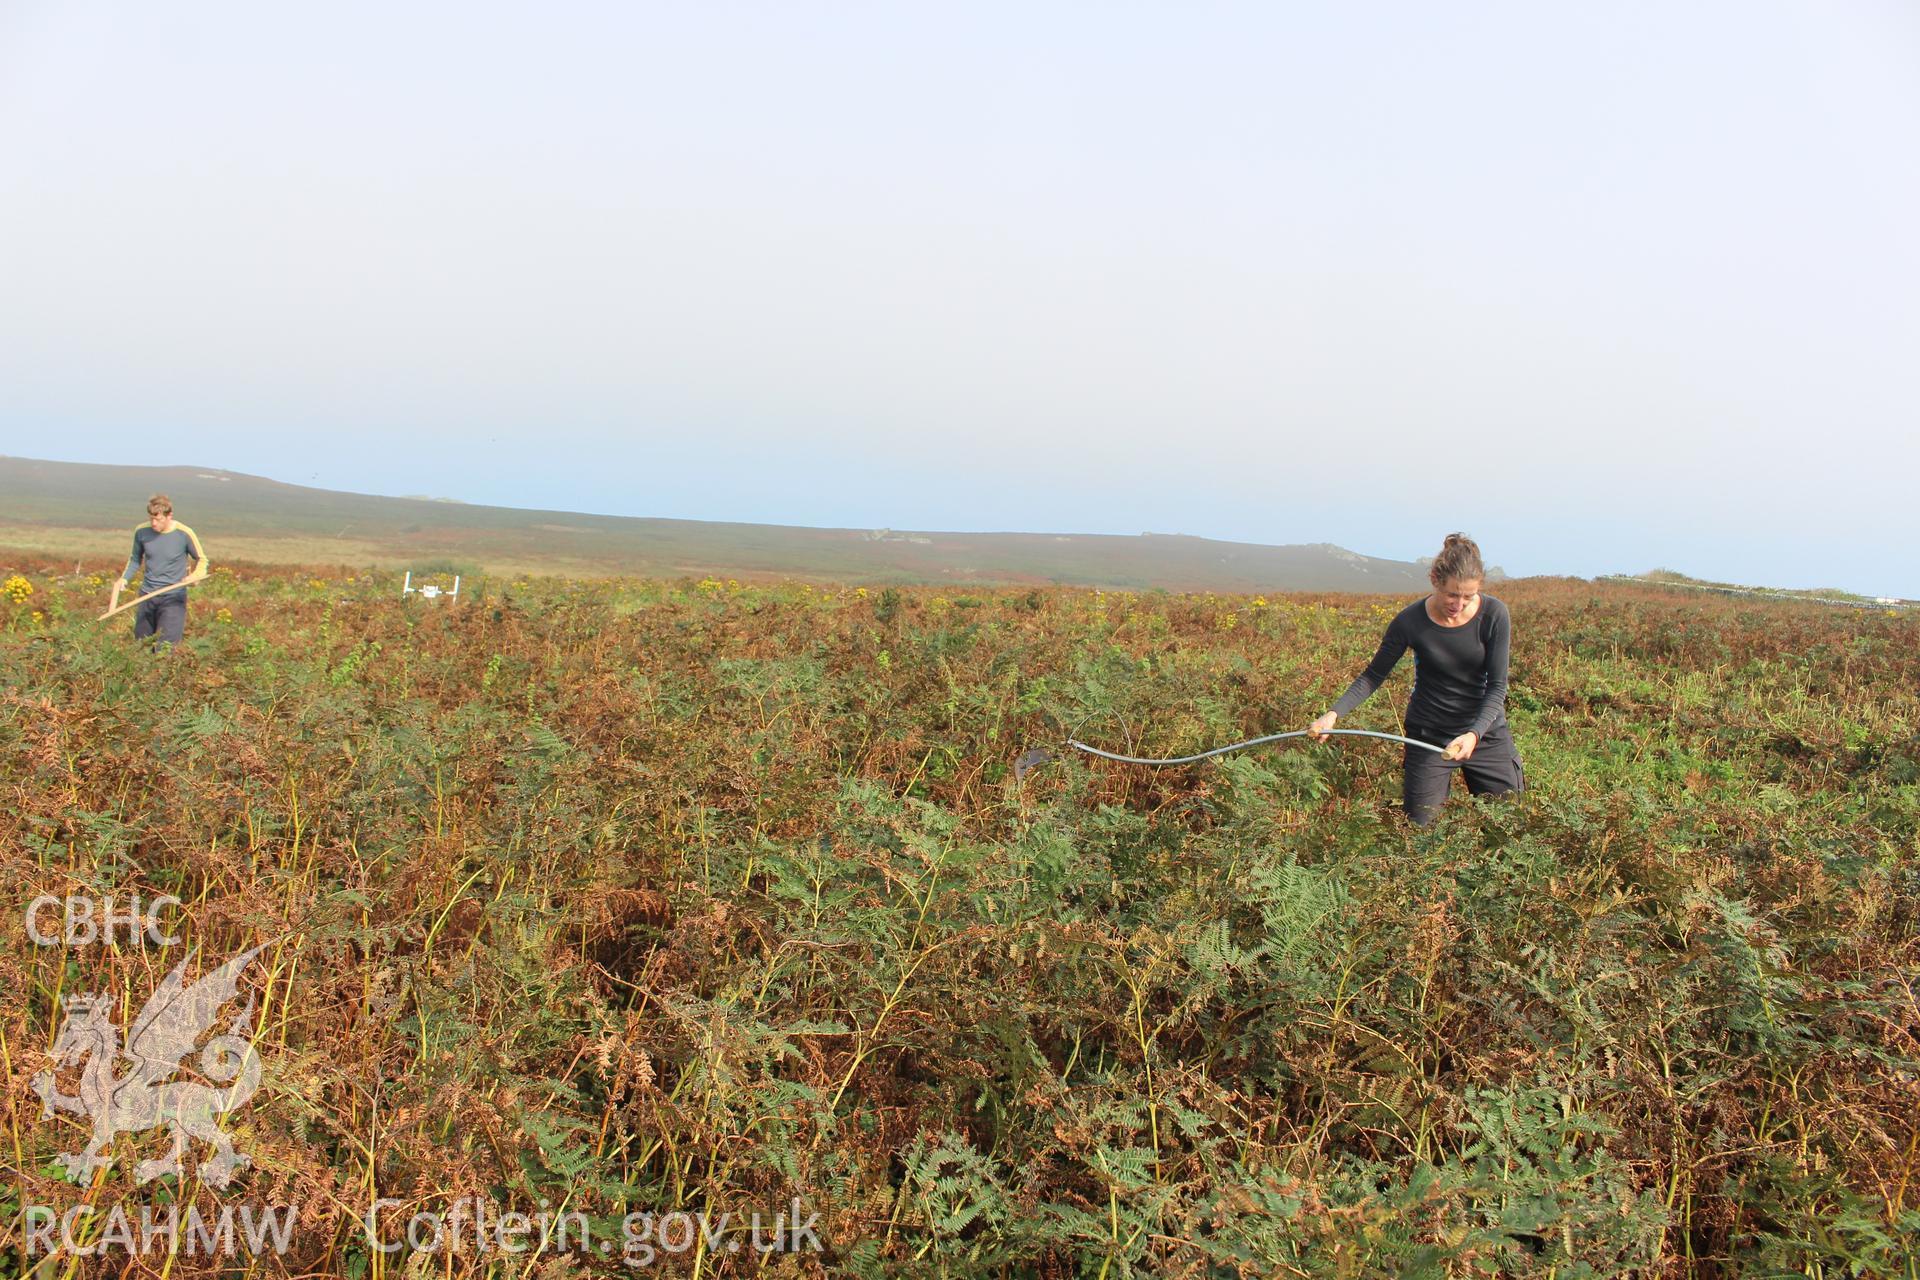 Investigator's photography of bracken clearance and geophysical (magnetometry) survey in progress in Well Meadow, west of the Old Farm on Skomer Island, September 2016.